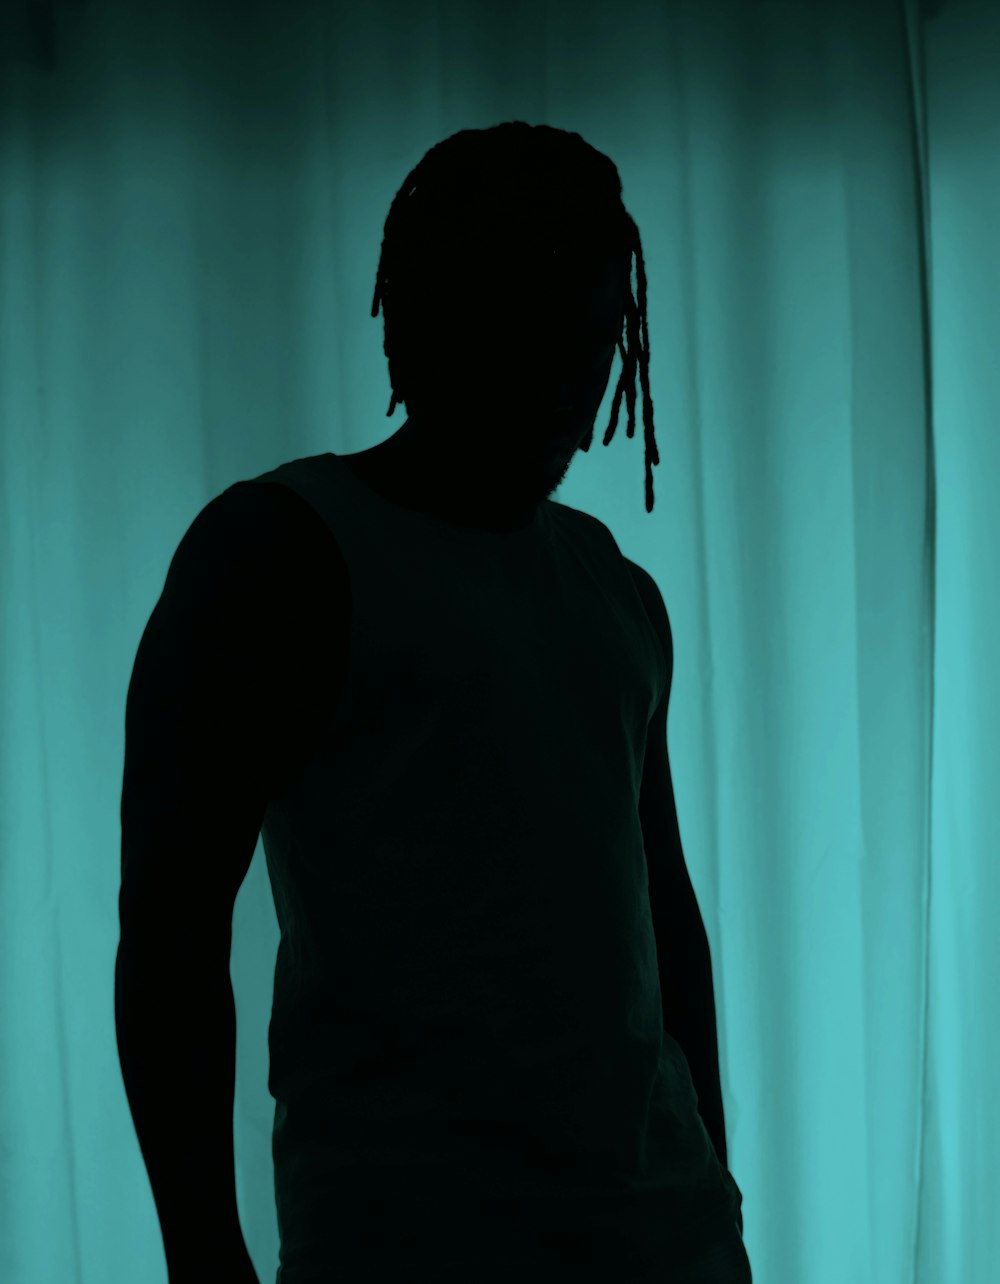 a man with dreadlocks standing in front of a curtain